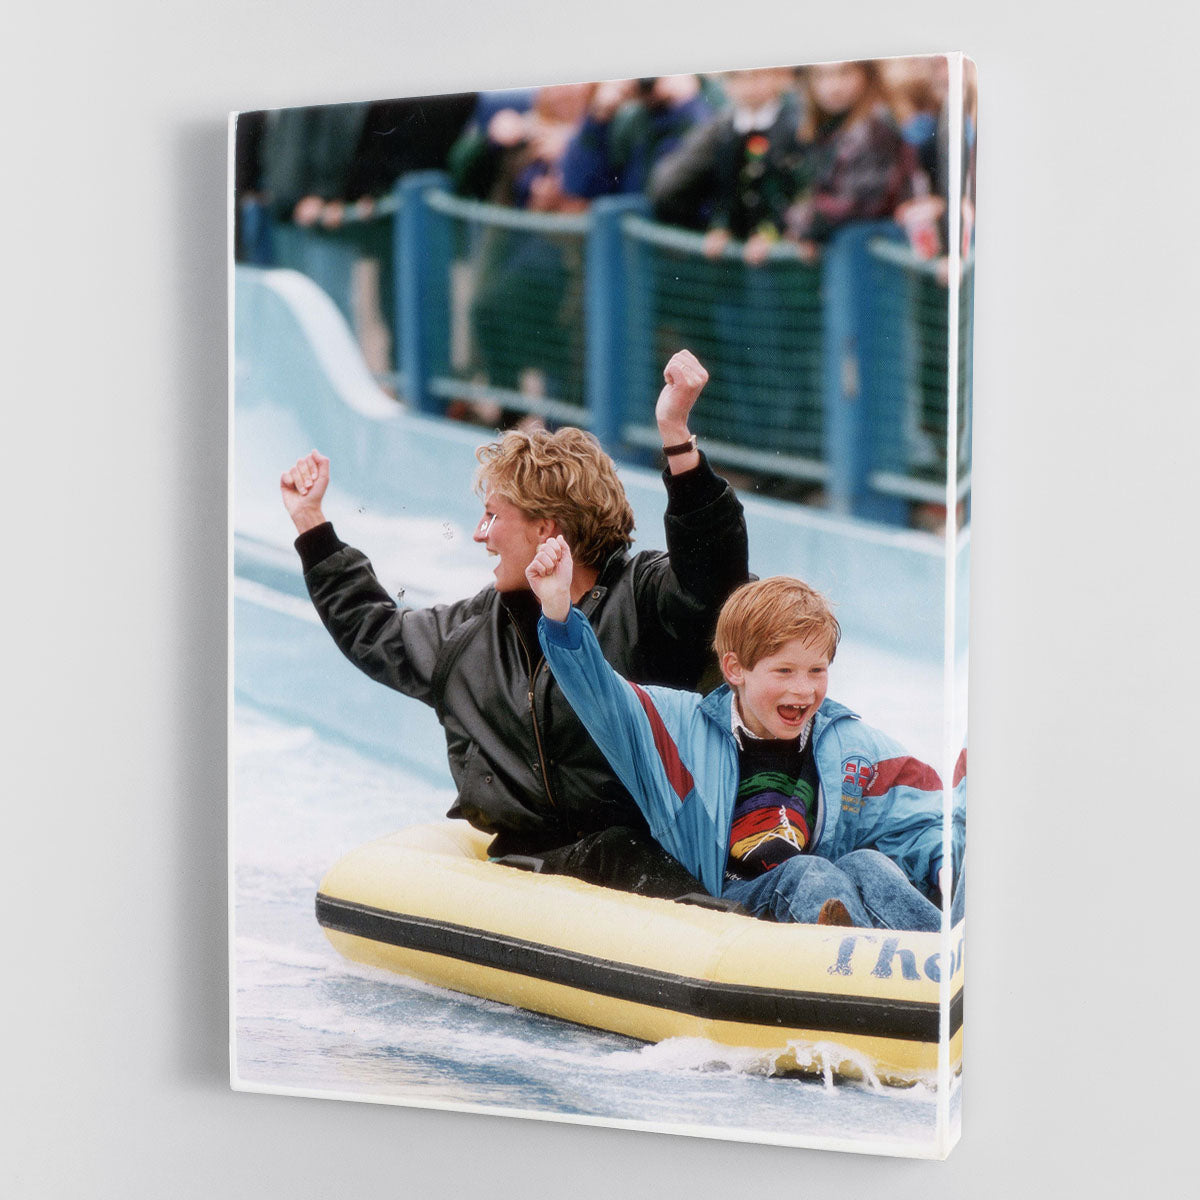 Princess Diana with Prince Harry on a water ride Canvas Print or Poster - Canvas Art Rocks - 1